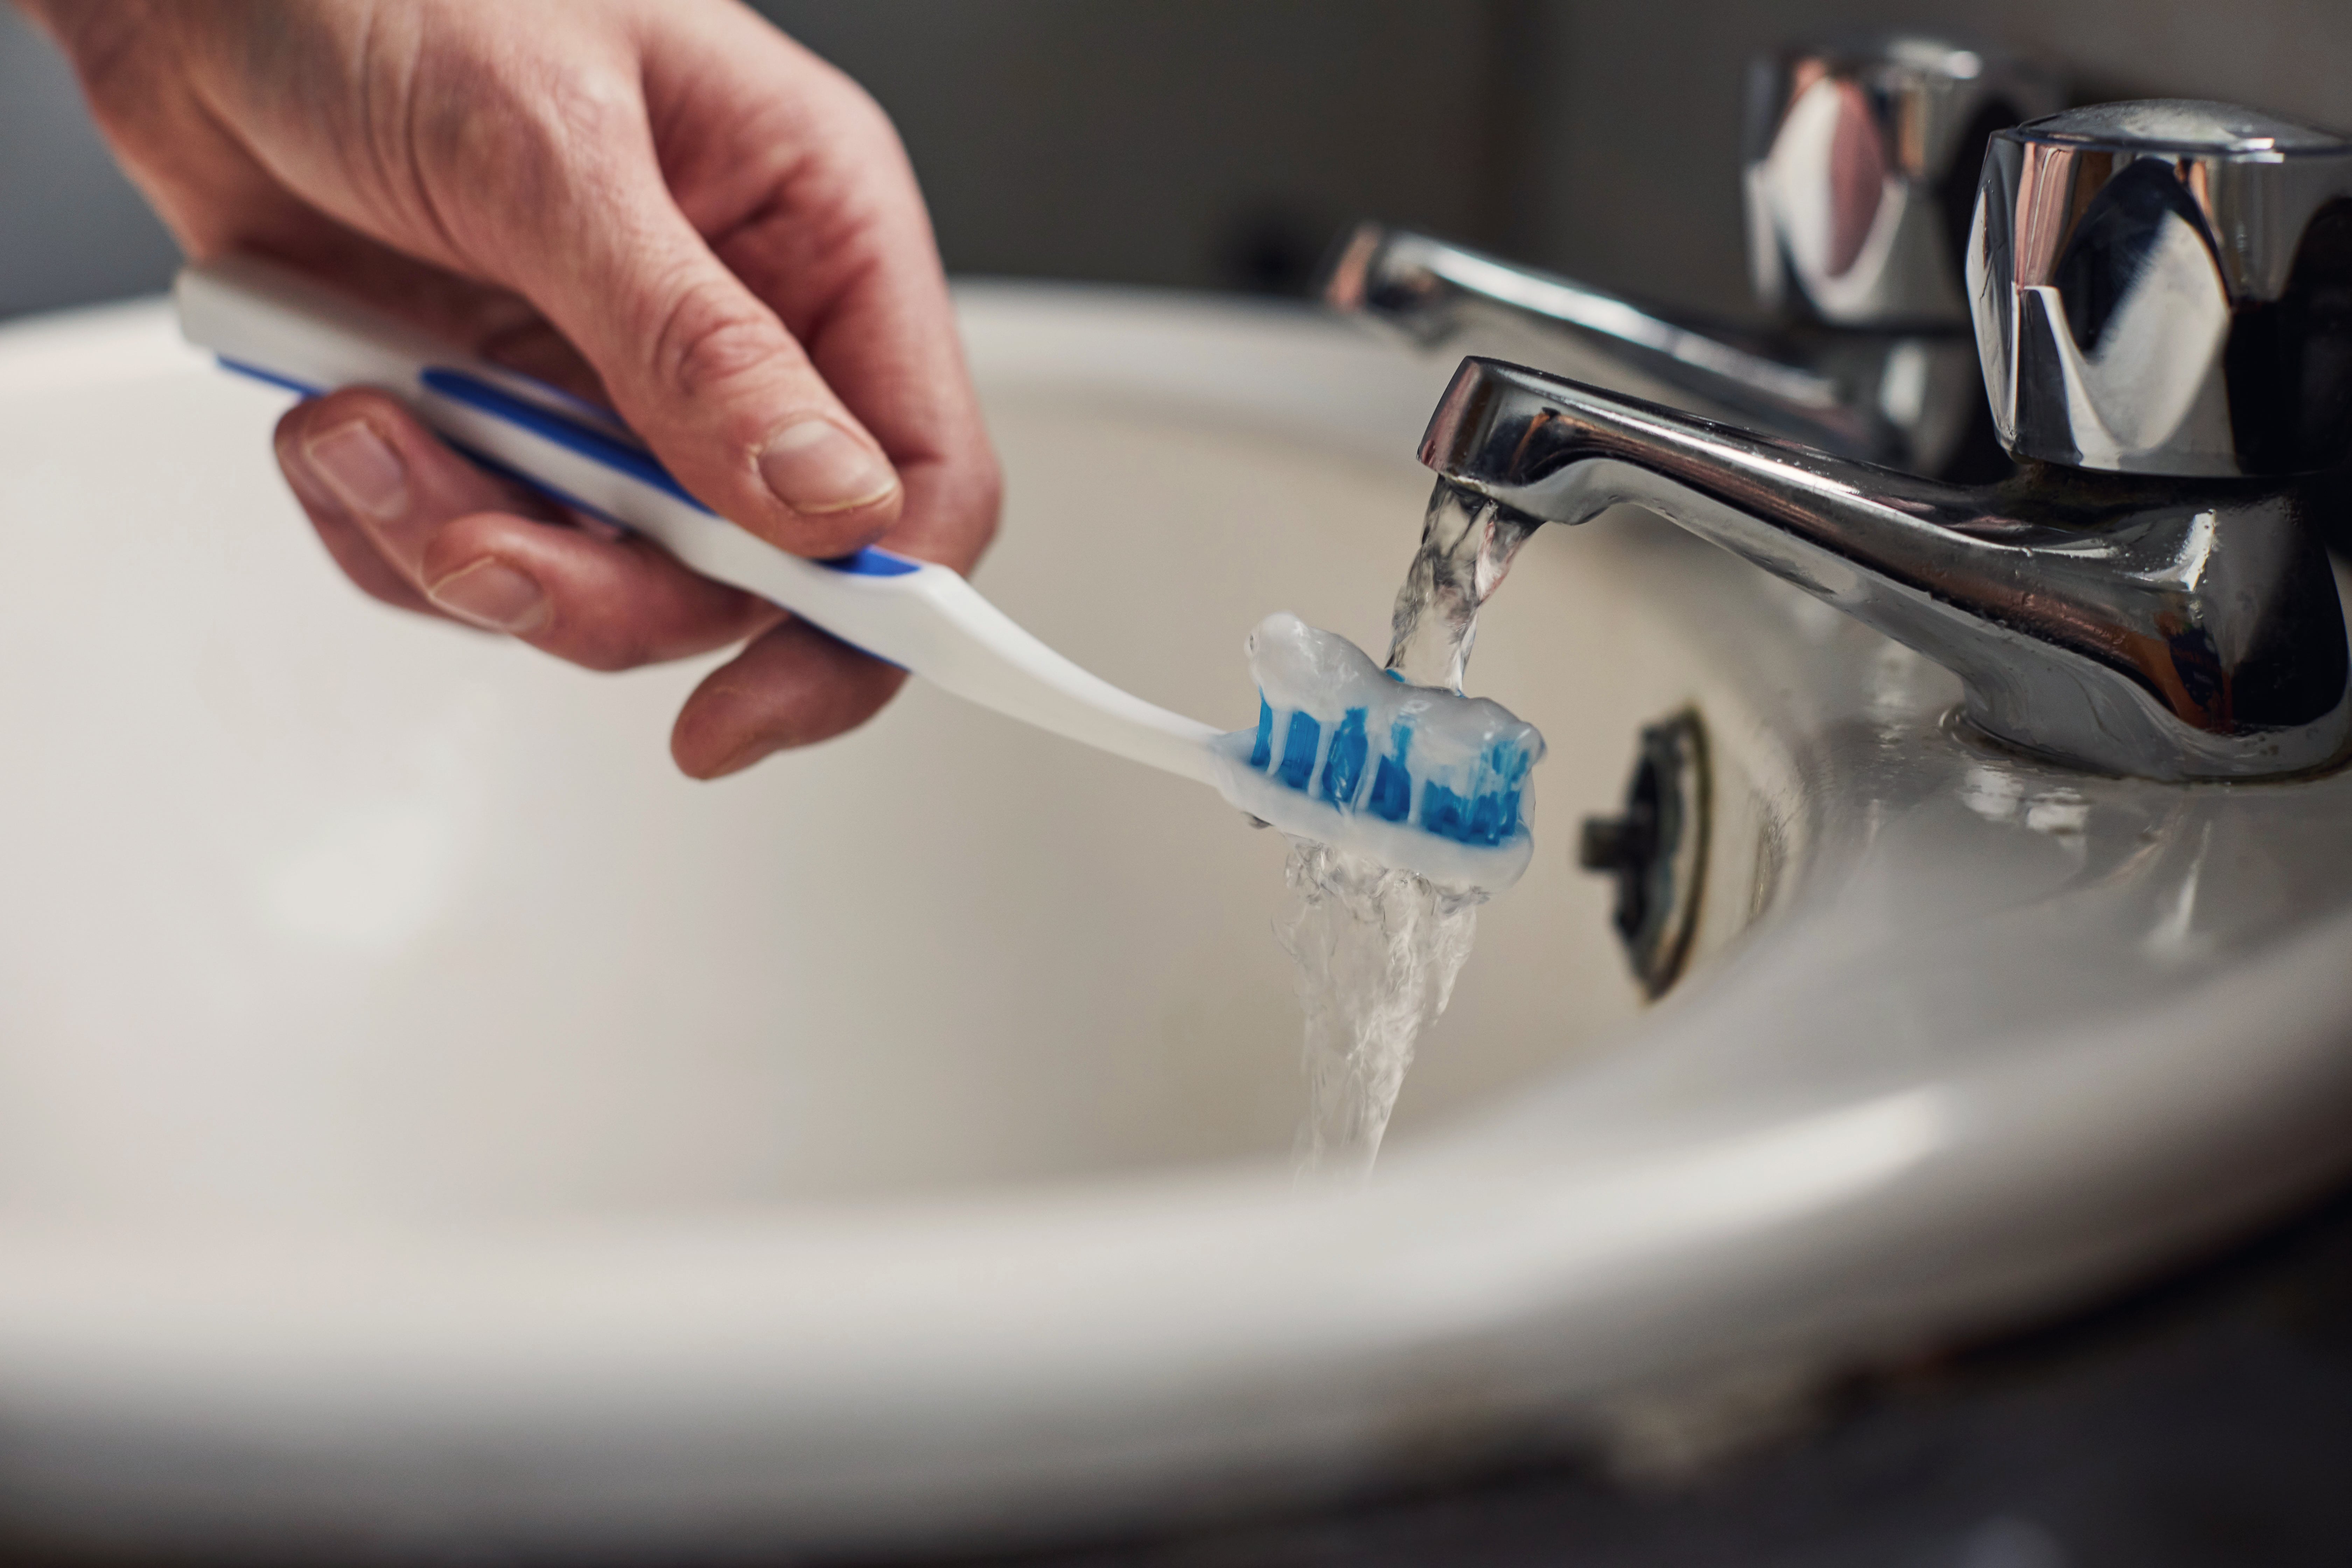 brushing your teeth with water